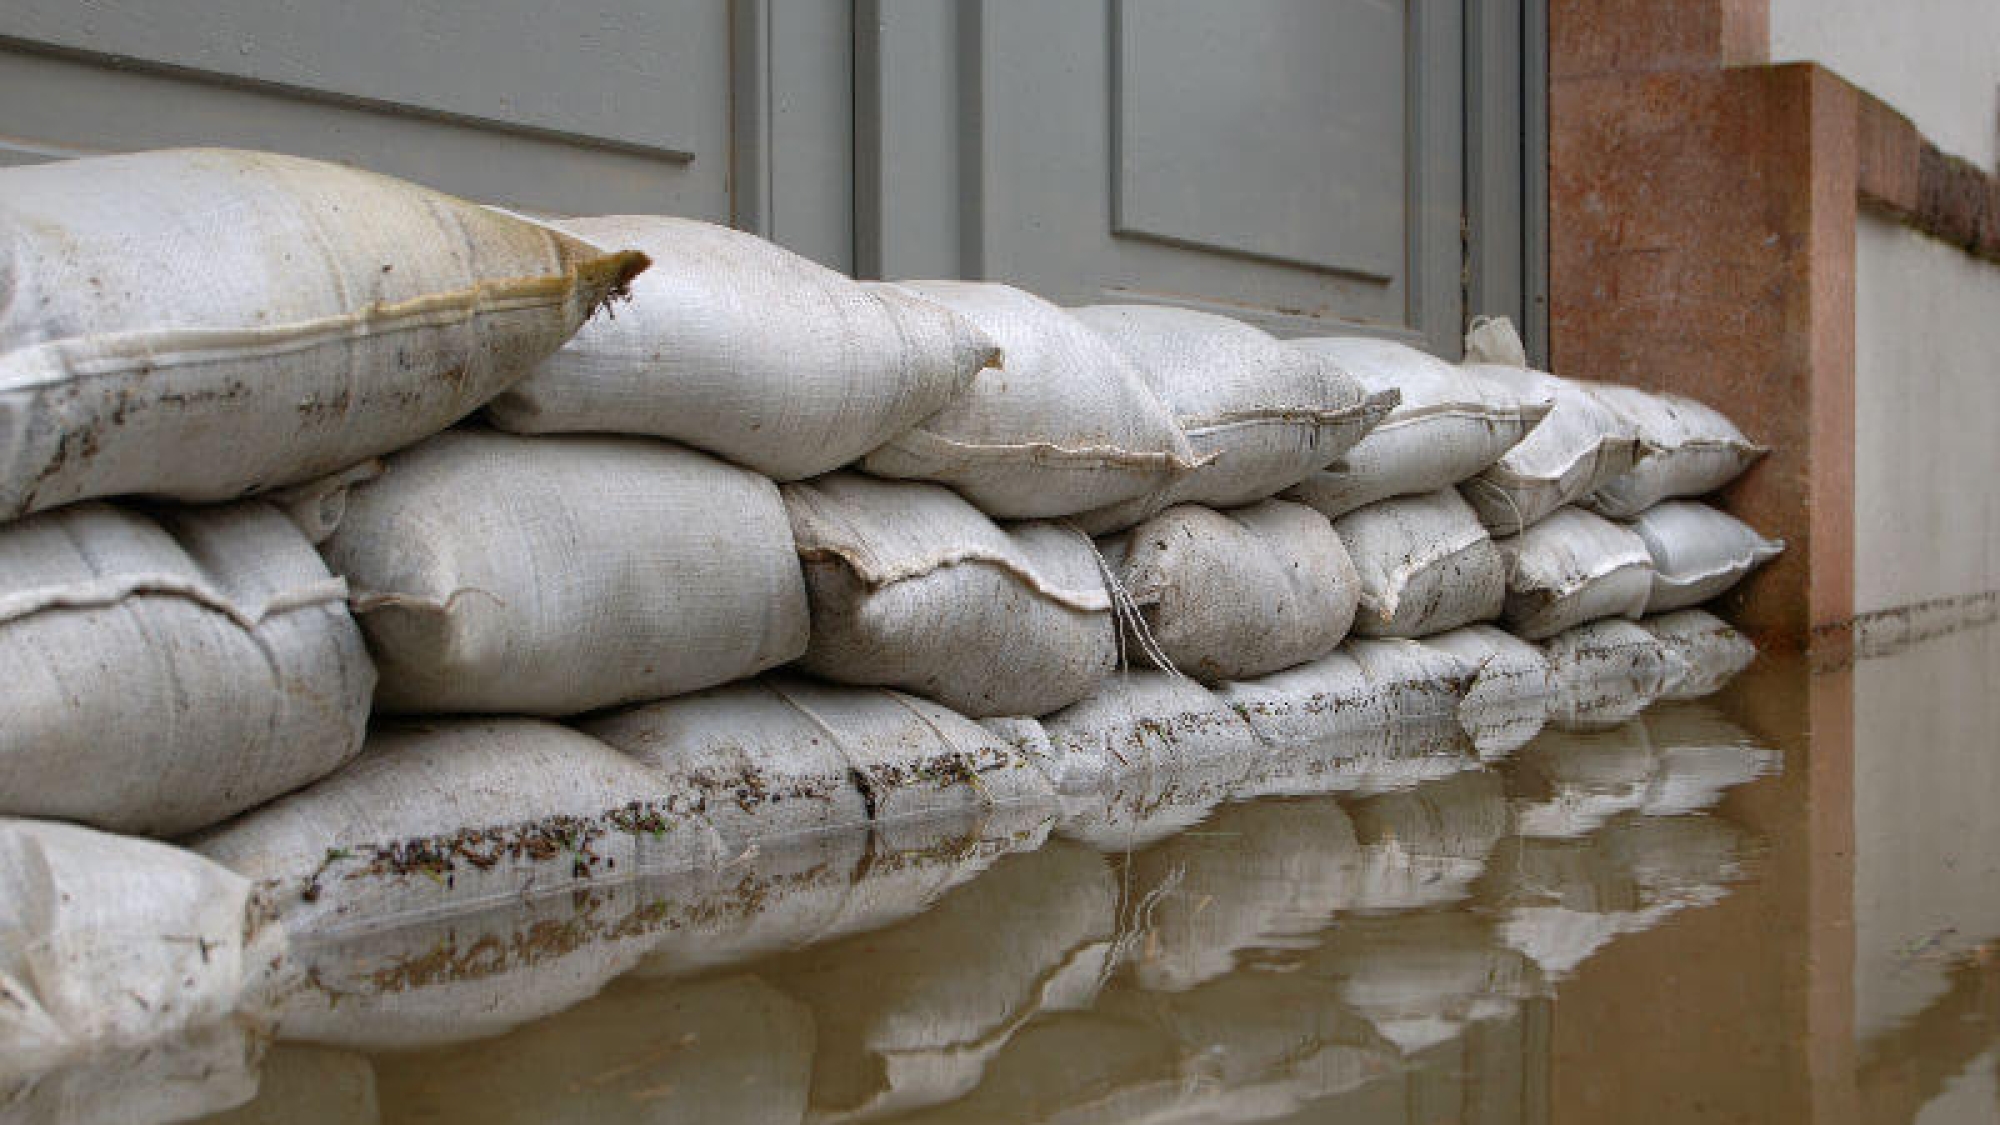 Sandbags to prevent flooding at UK homes and businesses